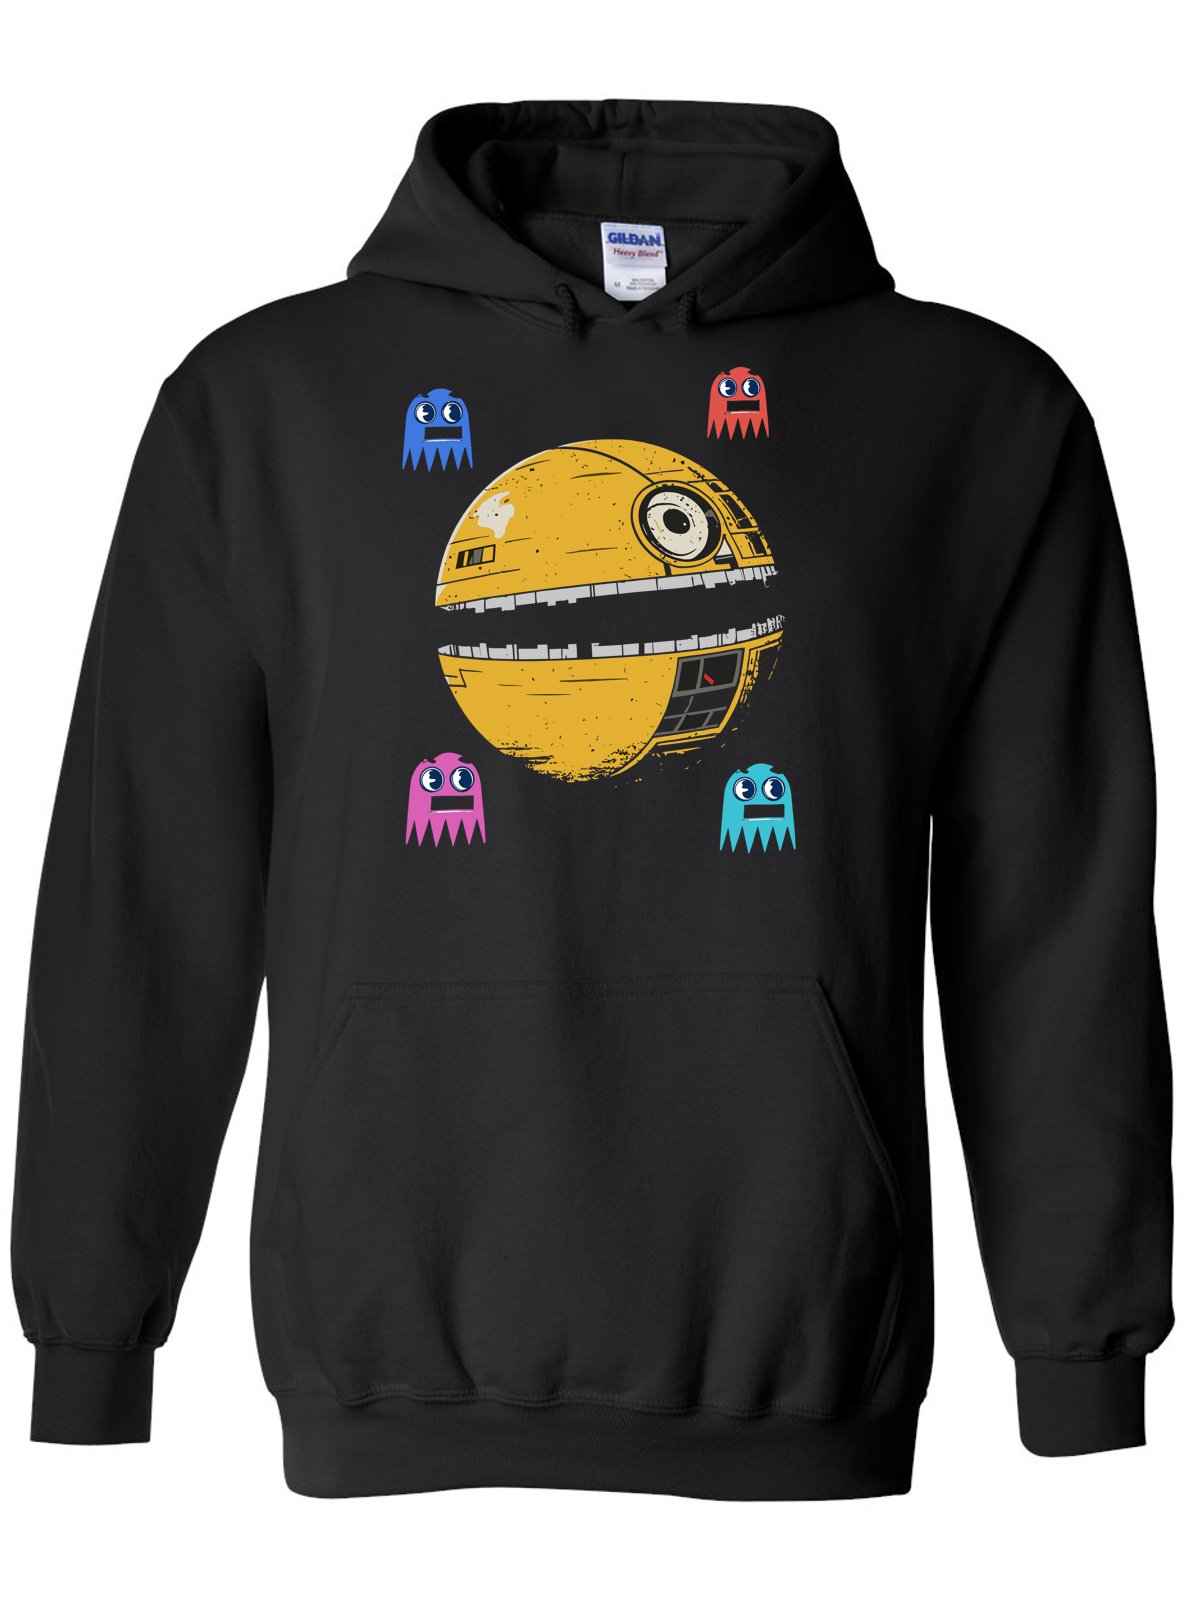 Exclusive Pacman Death Star Hoodie - Embrace the Fusion! -